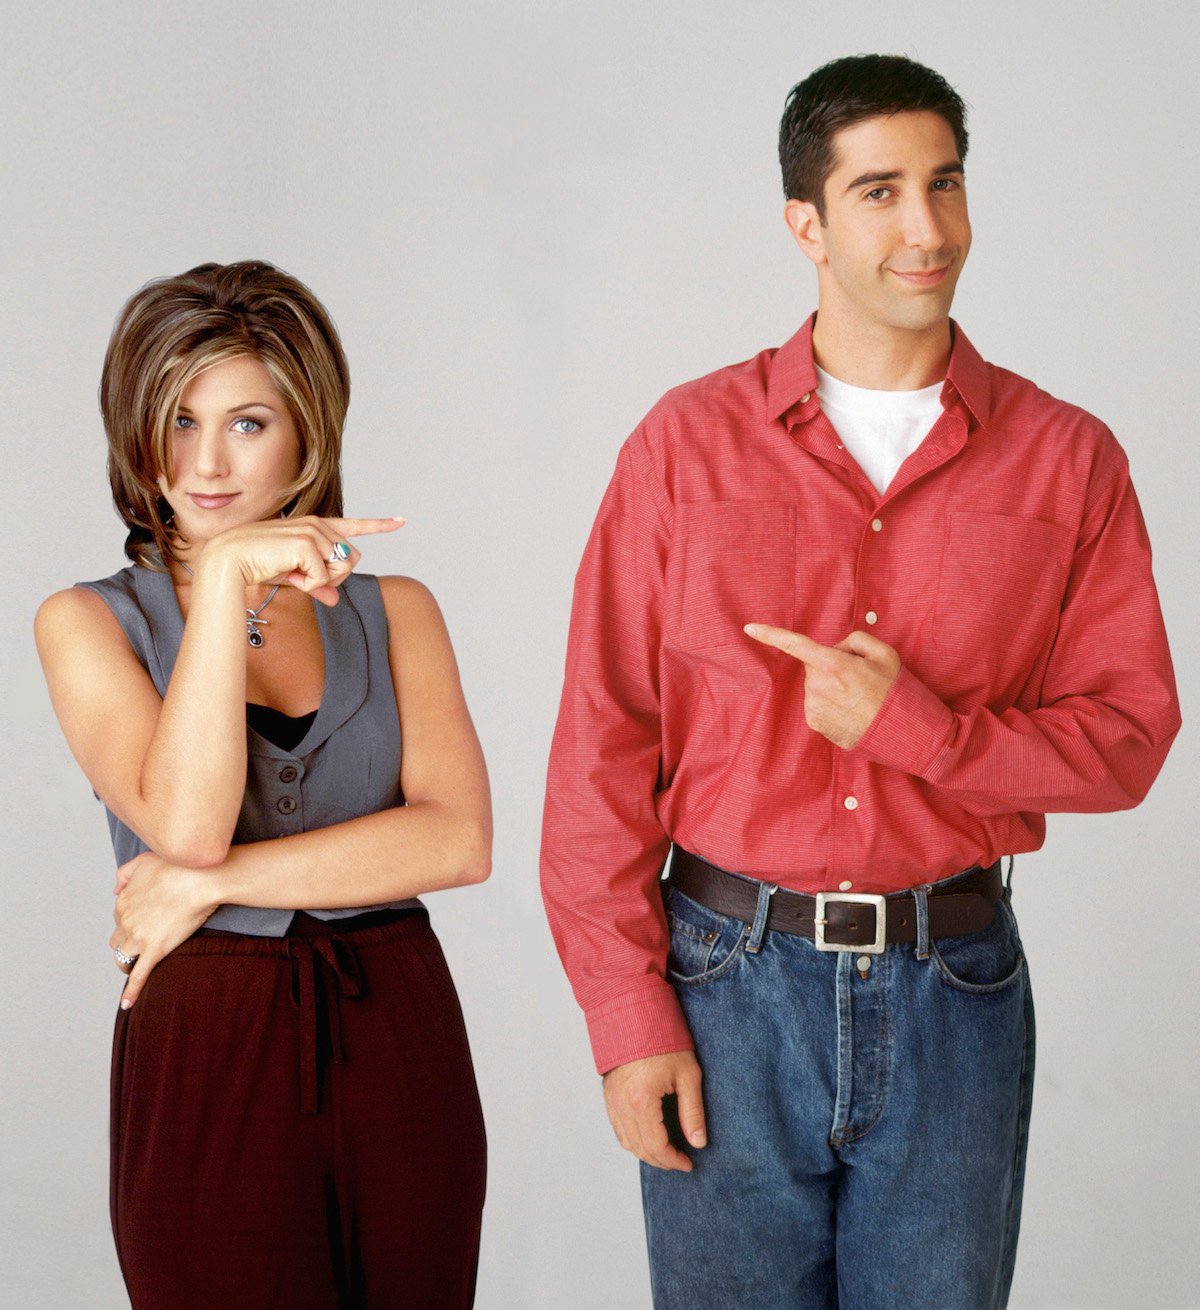 Jennifer Aniston and David Schwimmer stand facing the camera and smiling while pointing at each other.